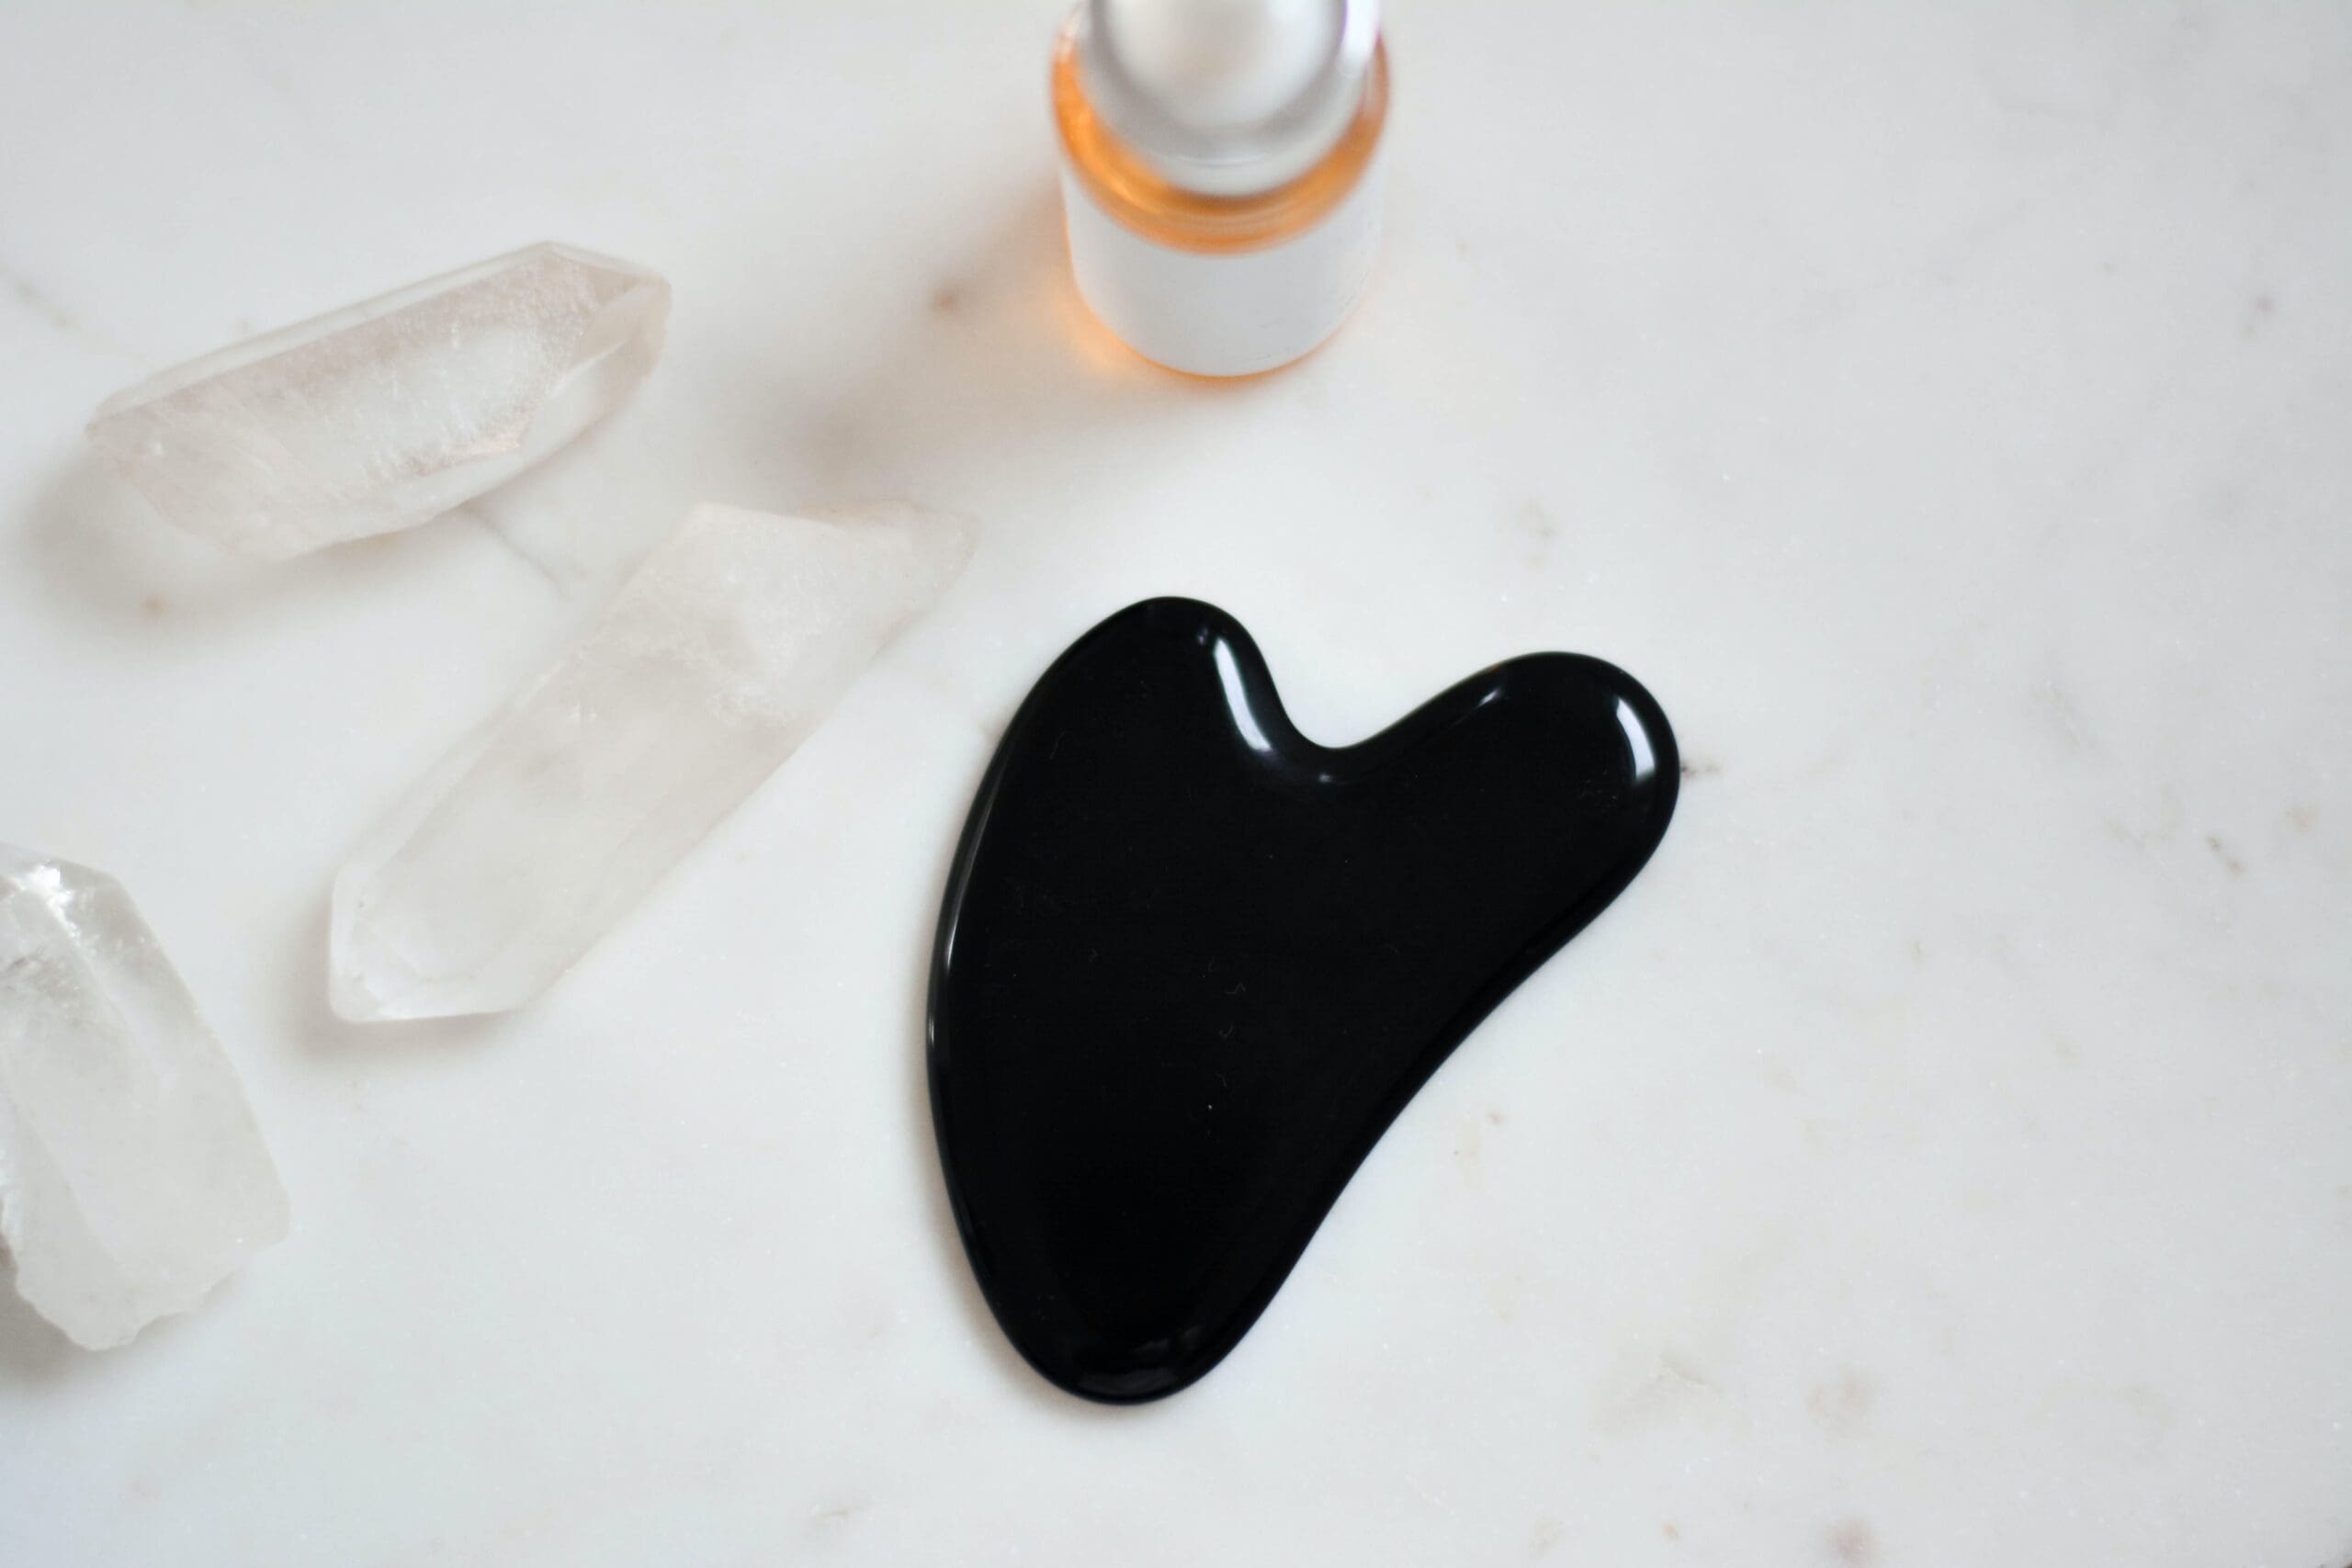 Gua Sha tool surrounded by crystals and face oil.